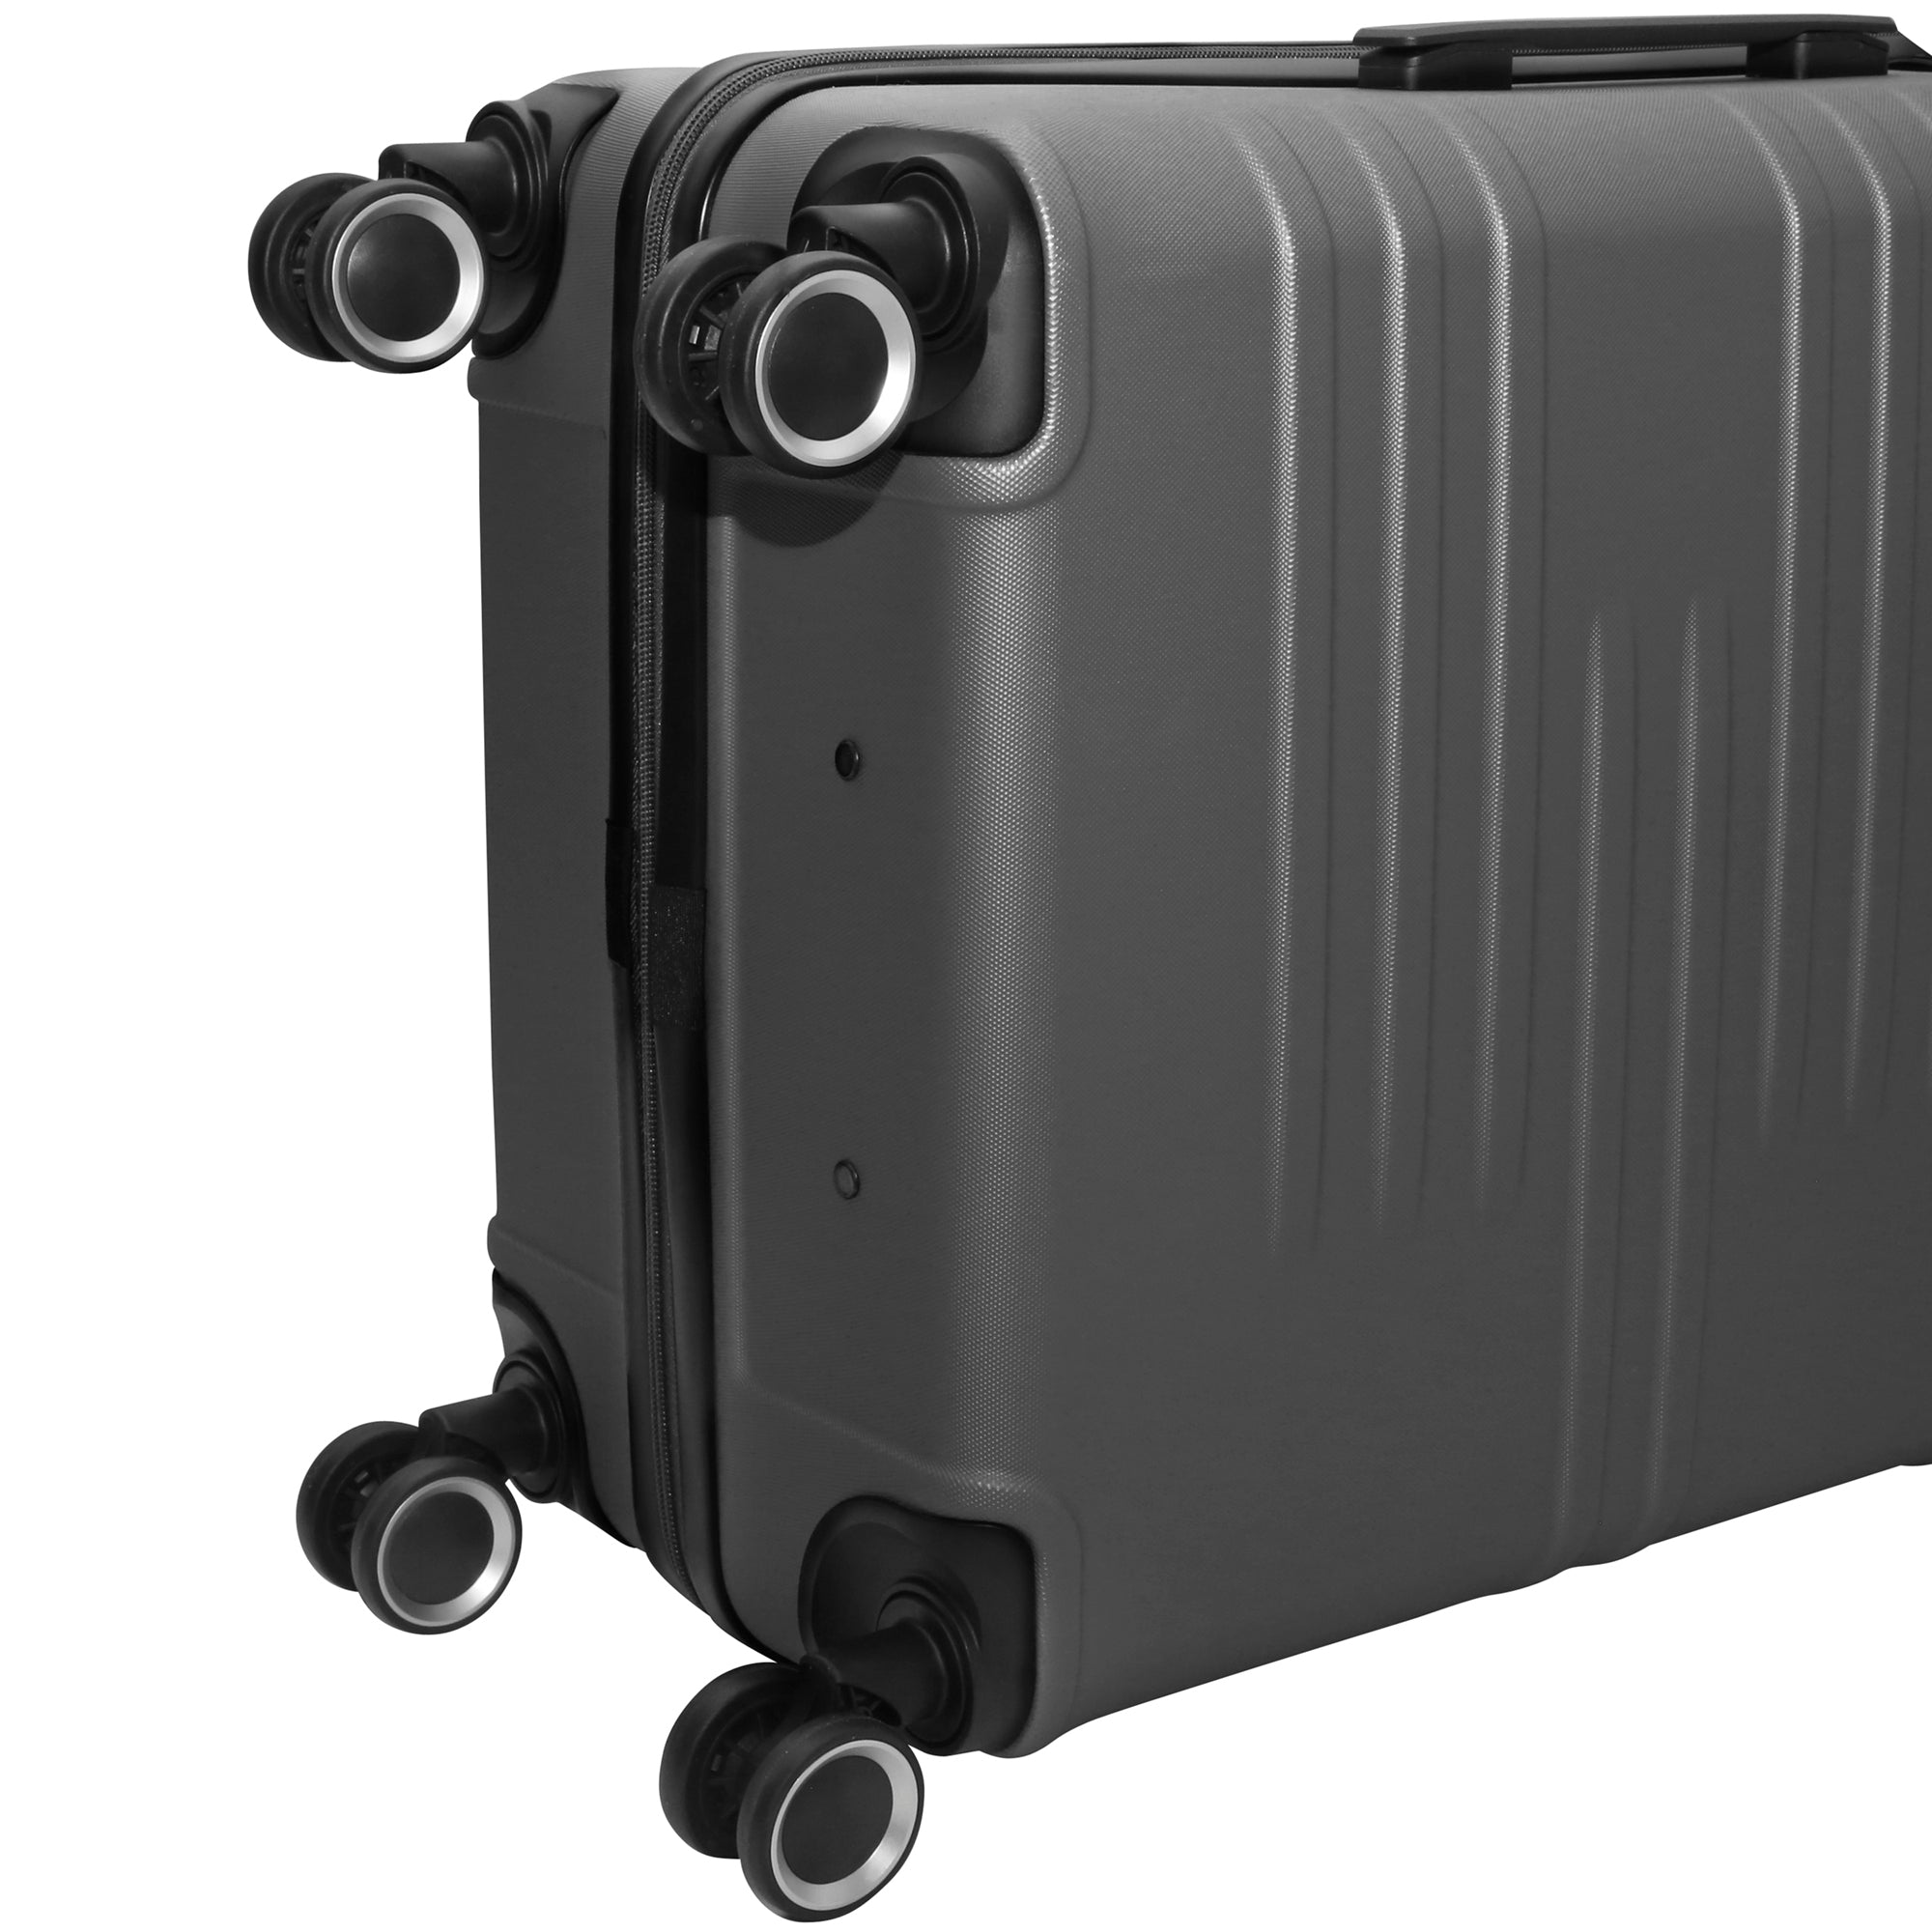 Travelmate 3-Piece Hard Shell Spinner Suitcase